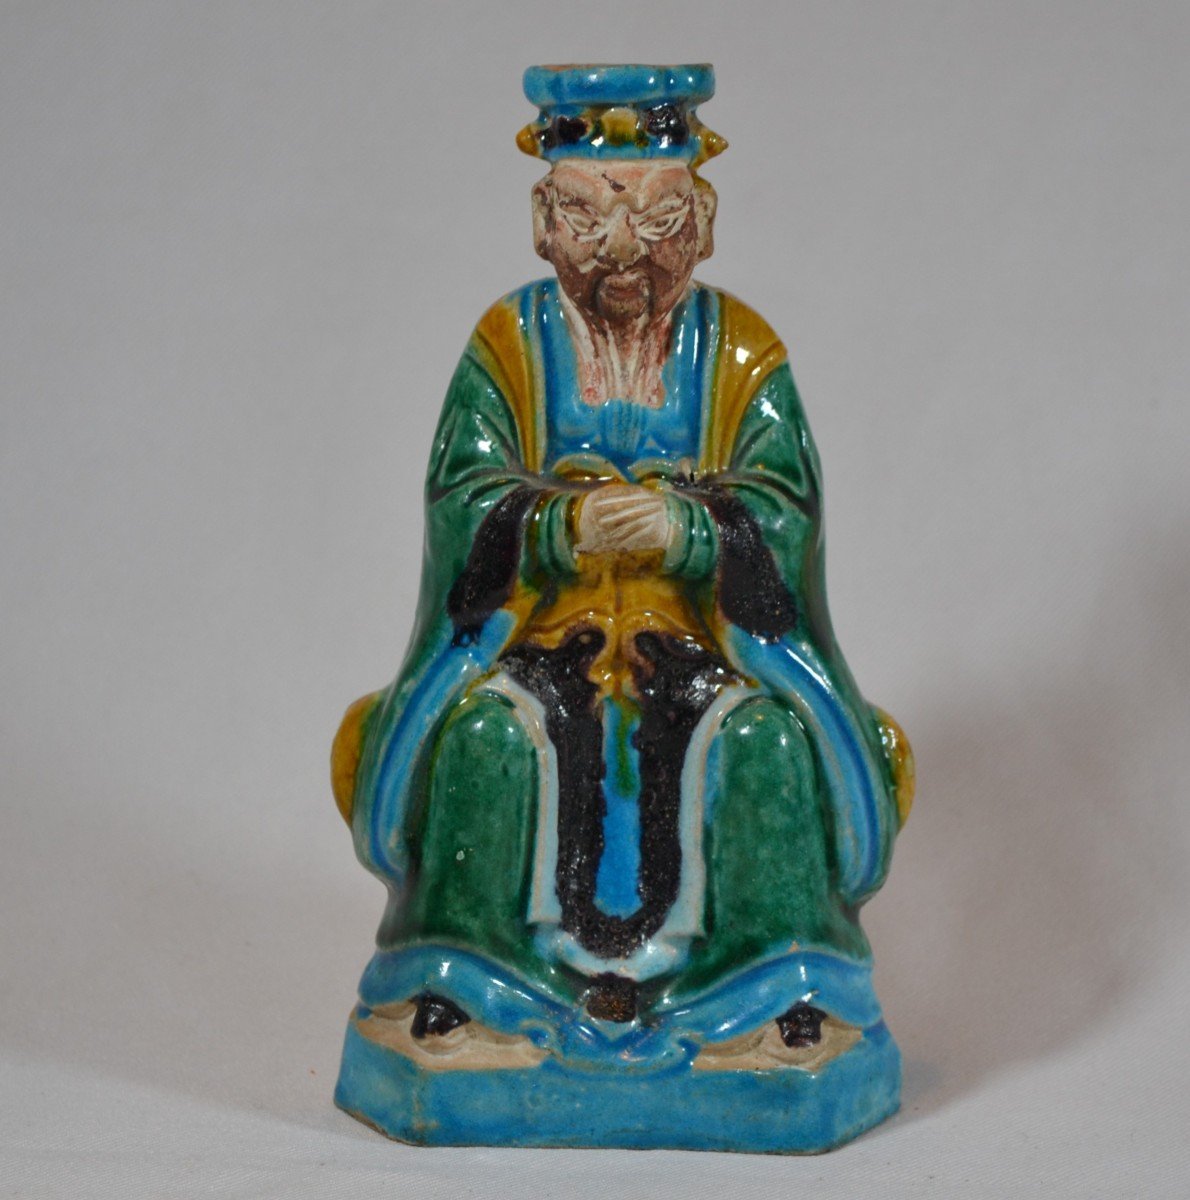 Chinese Dignitary In Sancai Style Enameled Stoneware. China Ming Dynasty 17th Century Or Before.